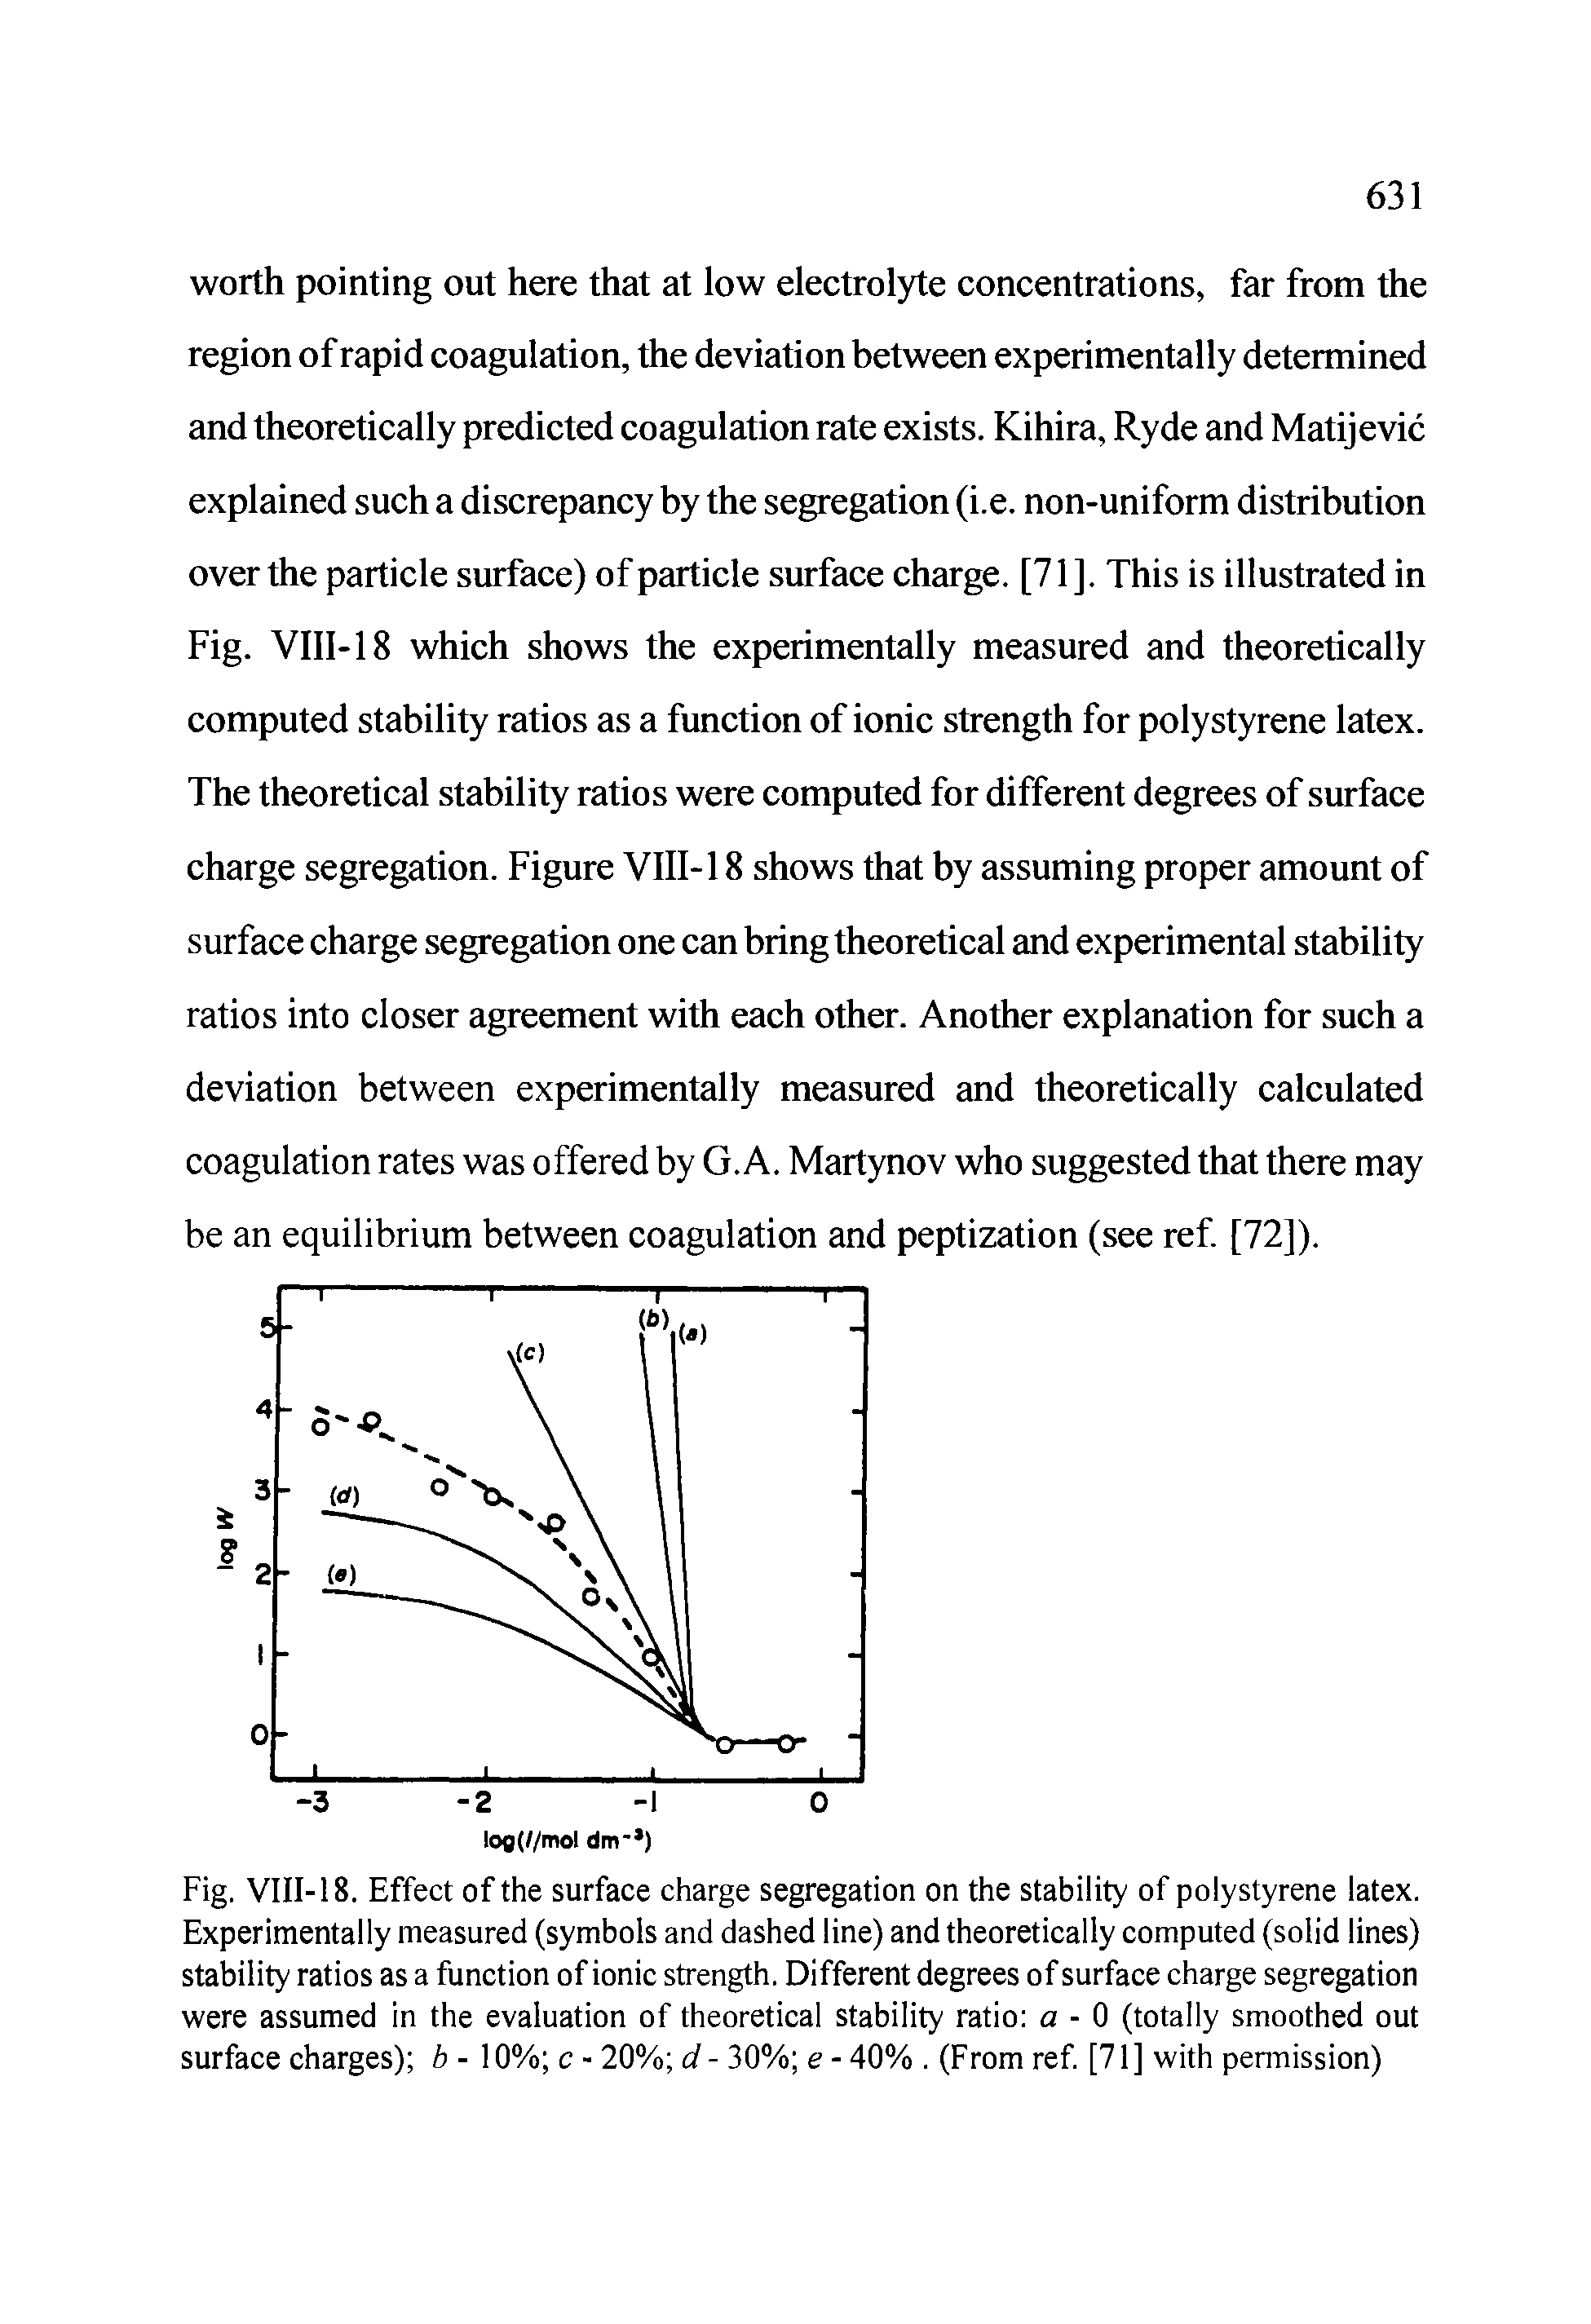 Fig. VIII-18. Effect of the surface charge segregation on the stability of polystyrene latex. Experimentally measured (symbols and dashed line) and theoretically computed (solid lines) stability ratios as a function of ionic strength. Different degrees of surface charge segregation were assumed in the evaluation of theoretical stability ratio a - 0 (totally smoothed out surface charges) b - 10% c - 20% d - 30% e - 40%. (From ref. [71] with pennission)...